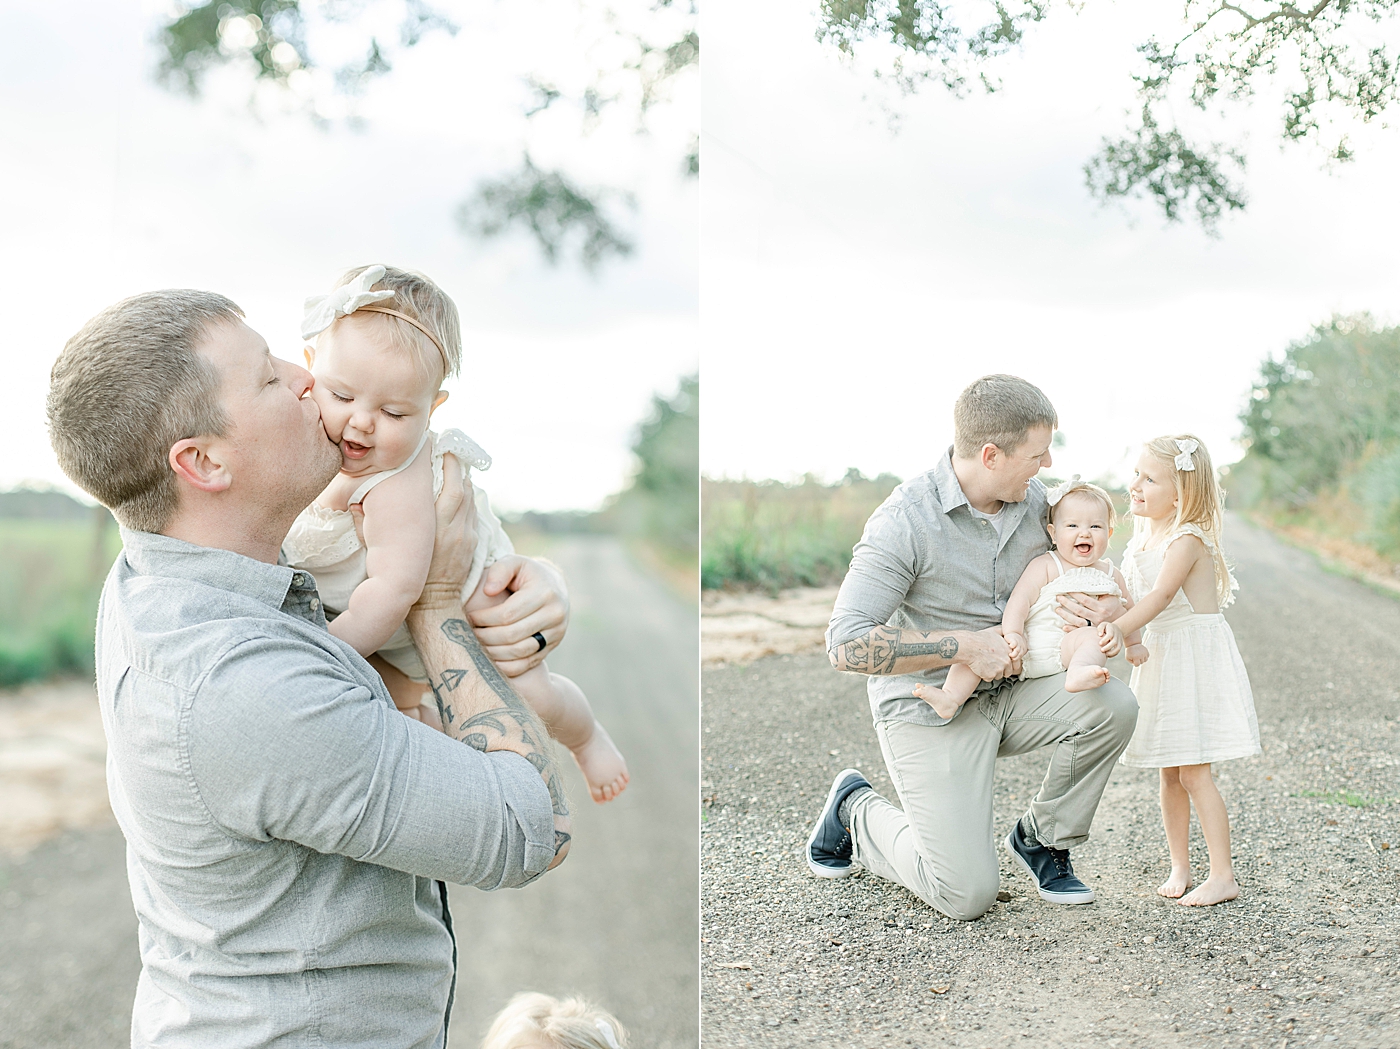 Dad kissing baby girl in white on the cheek | Photo by Hattiesburg MS family photographer Little Sunshine Photography 